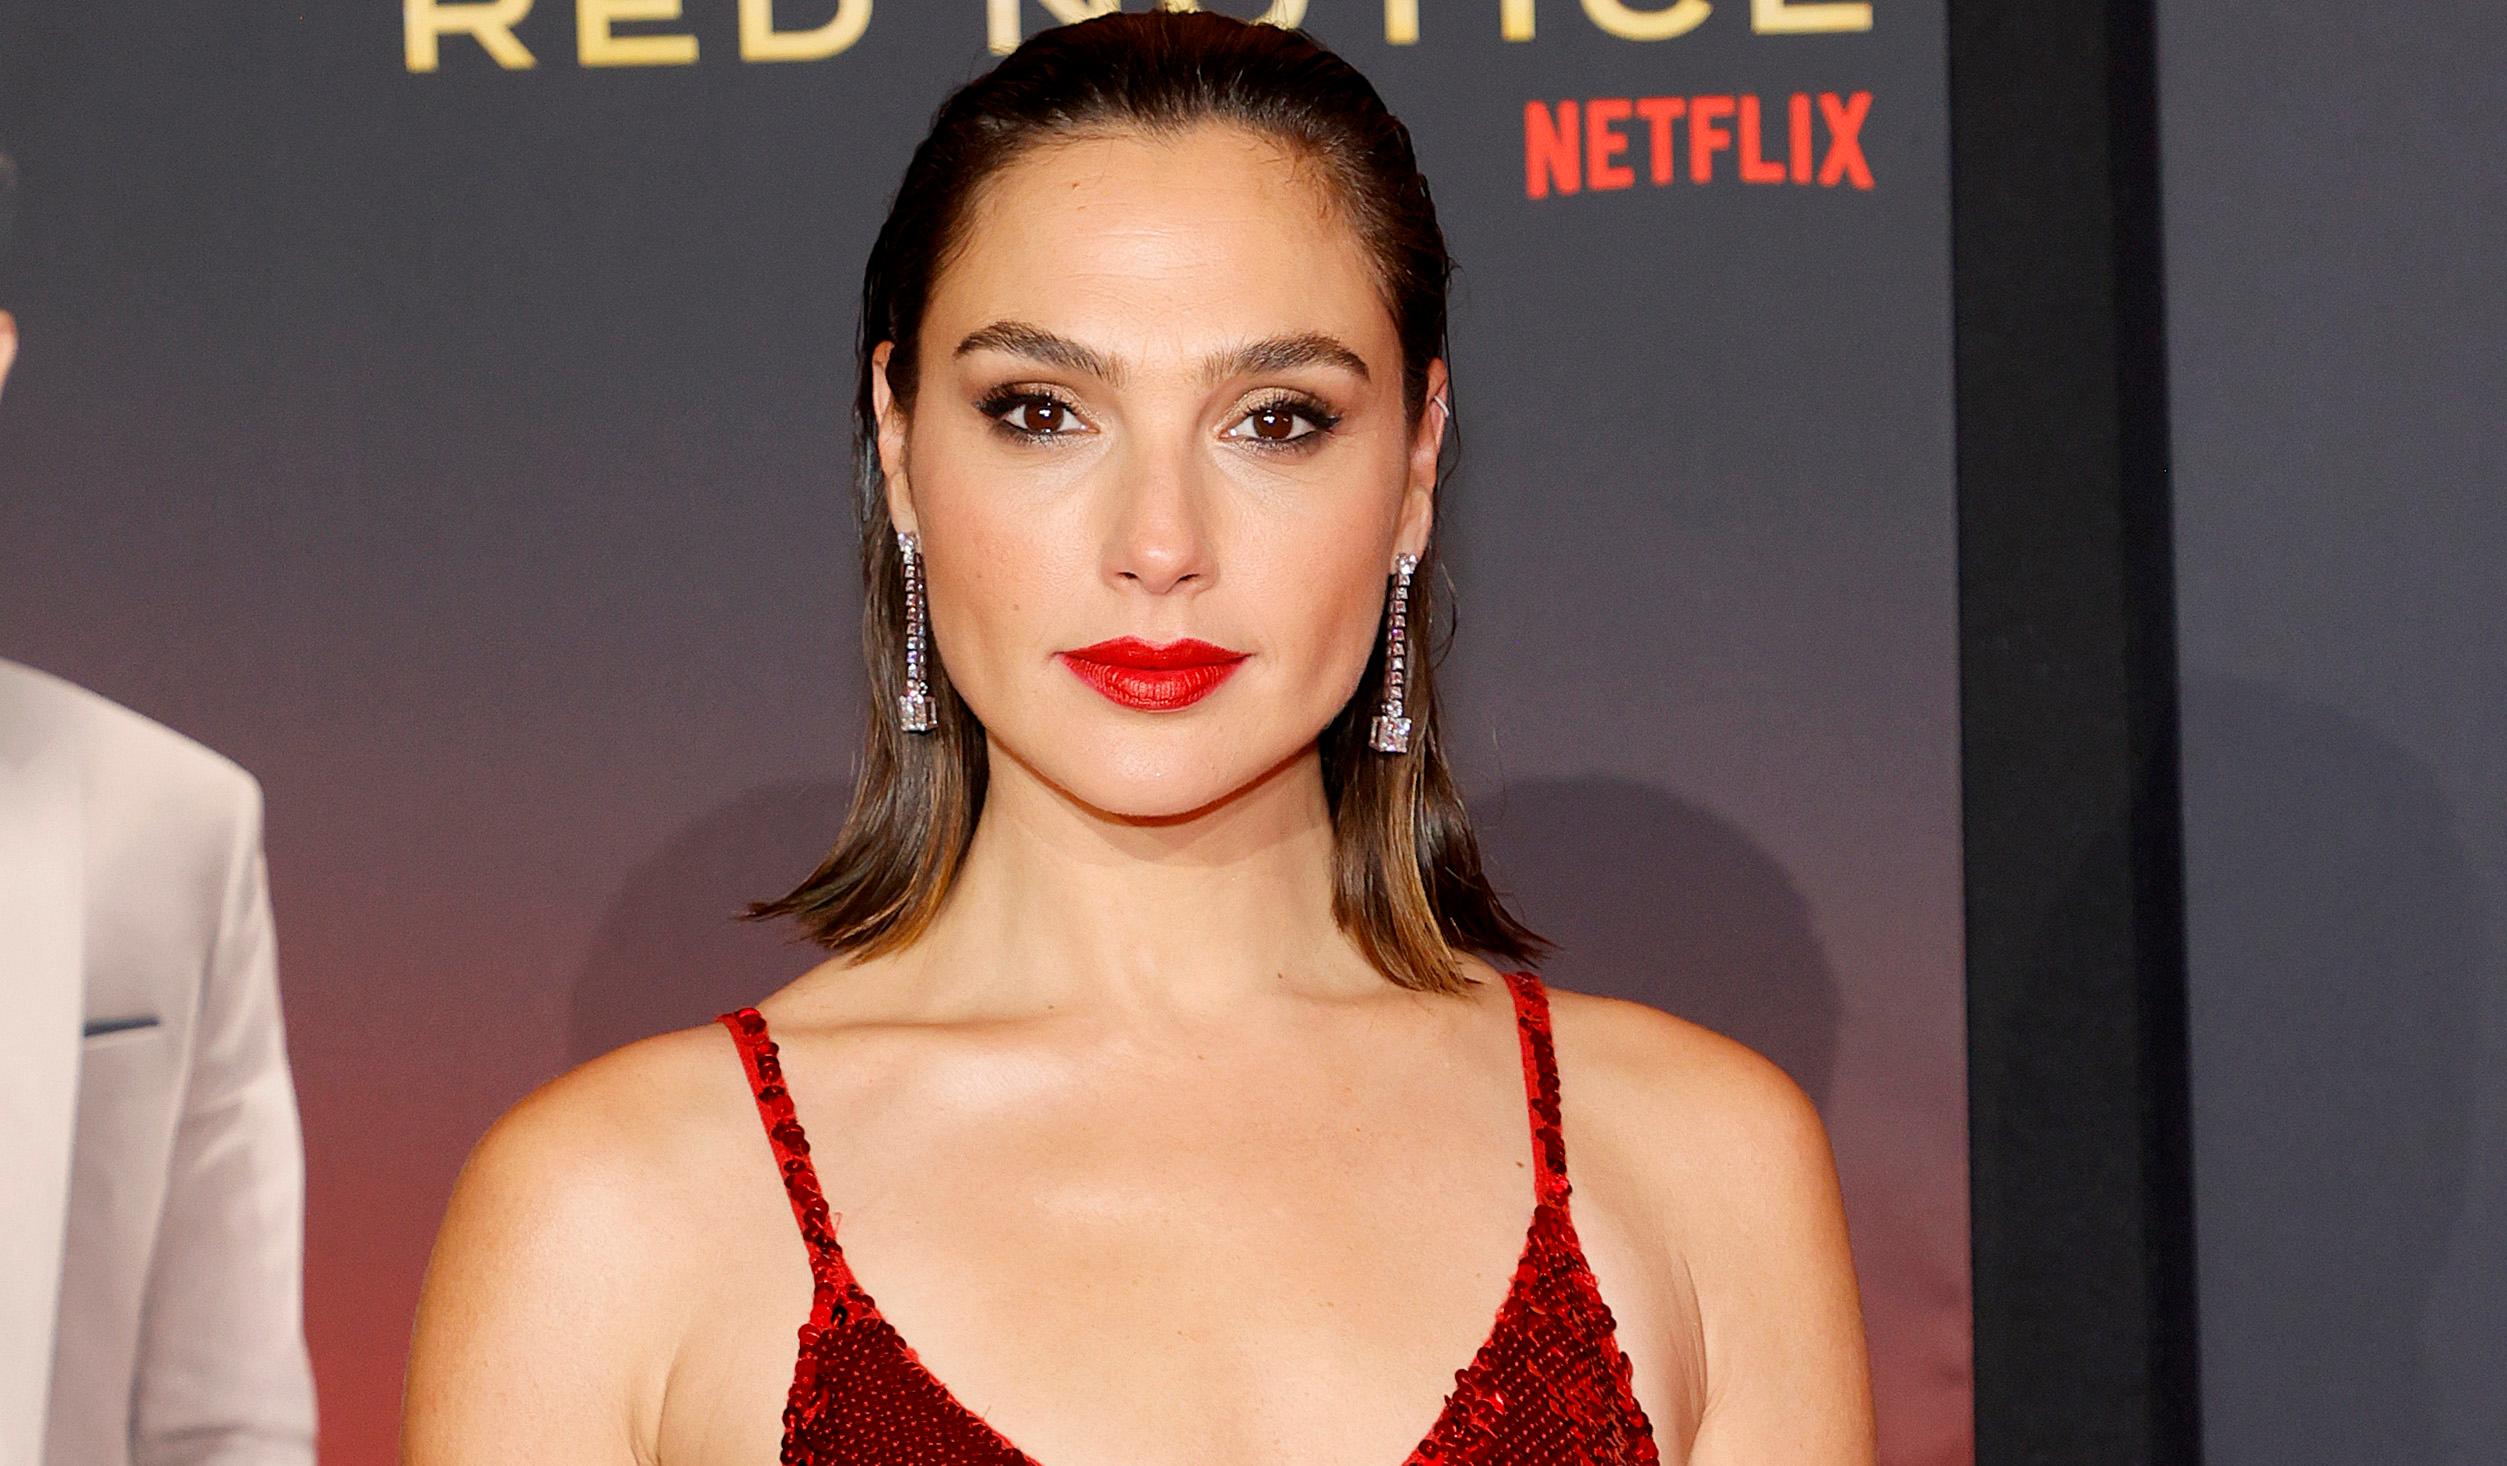 Gal Gadot at the World Premiere of Netflix's "Red Notice" at L.A. LIVE on Nov. 3, 2021